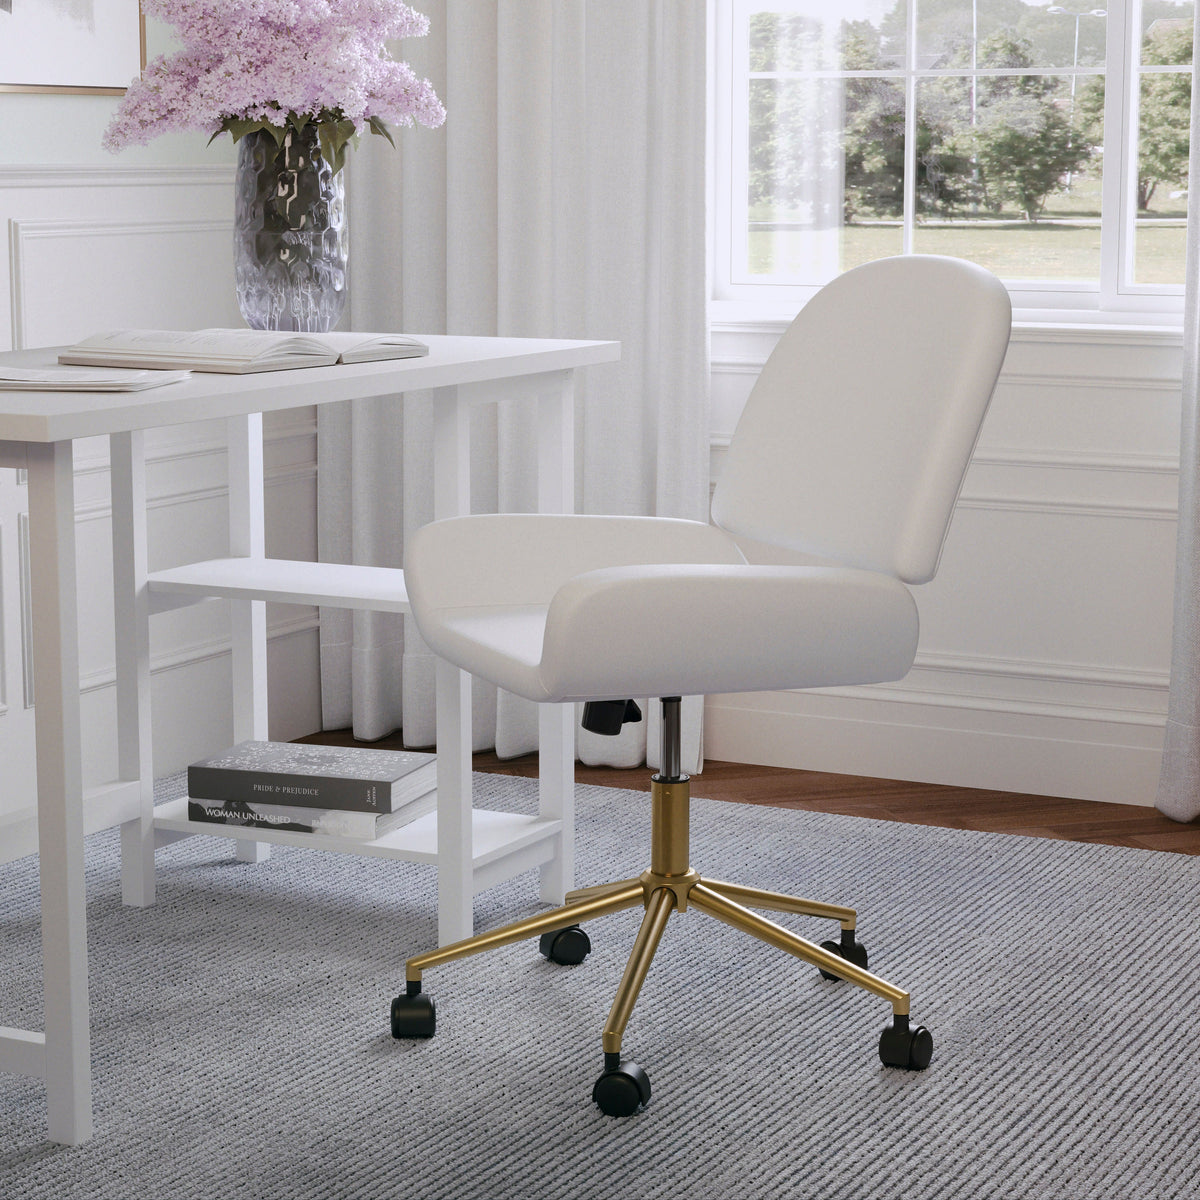 White Faux Leather/Polished Brass |#| Faux Leather Armless Swivel Home Office Chair - White/Polished Brass